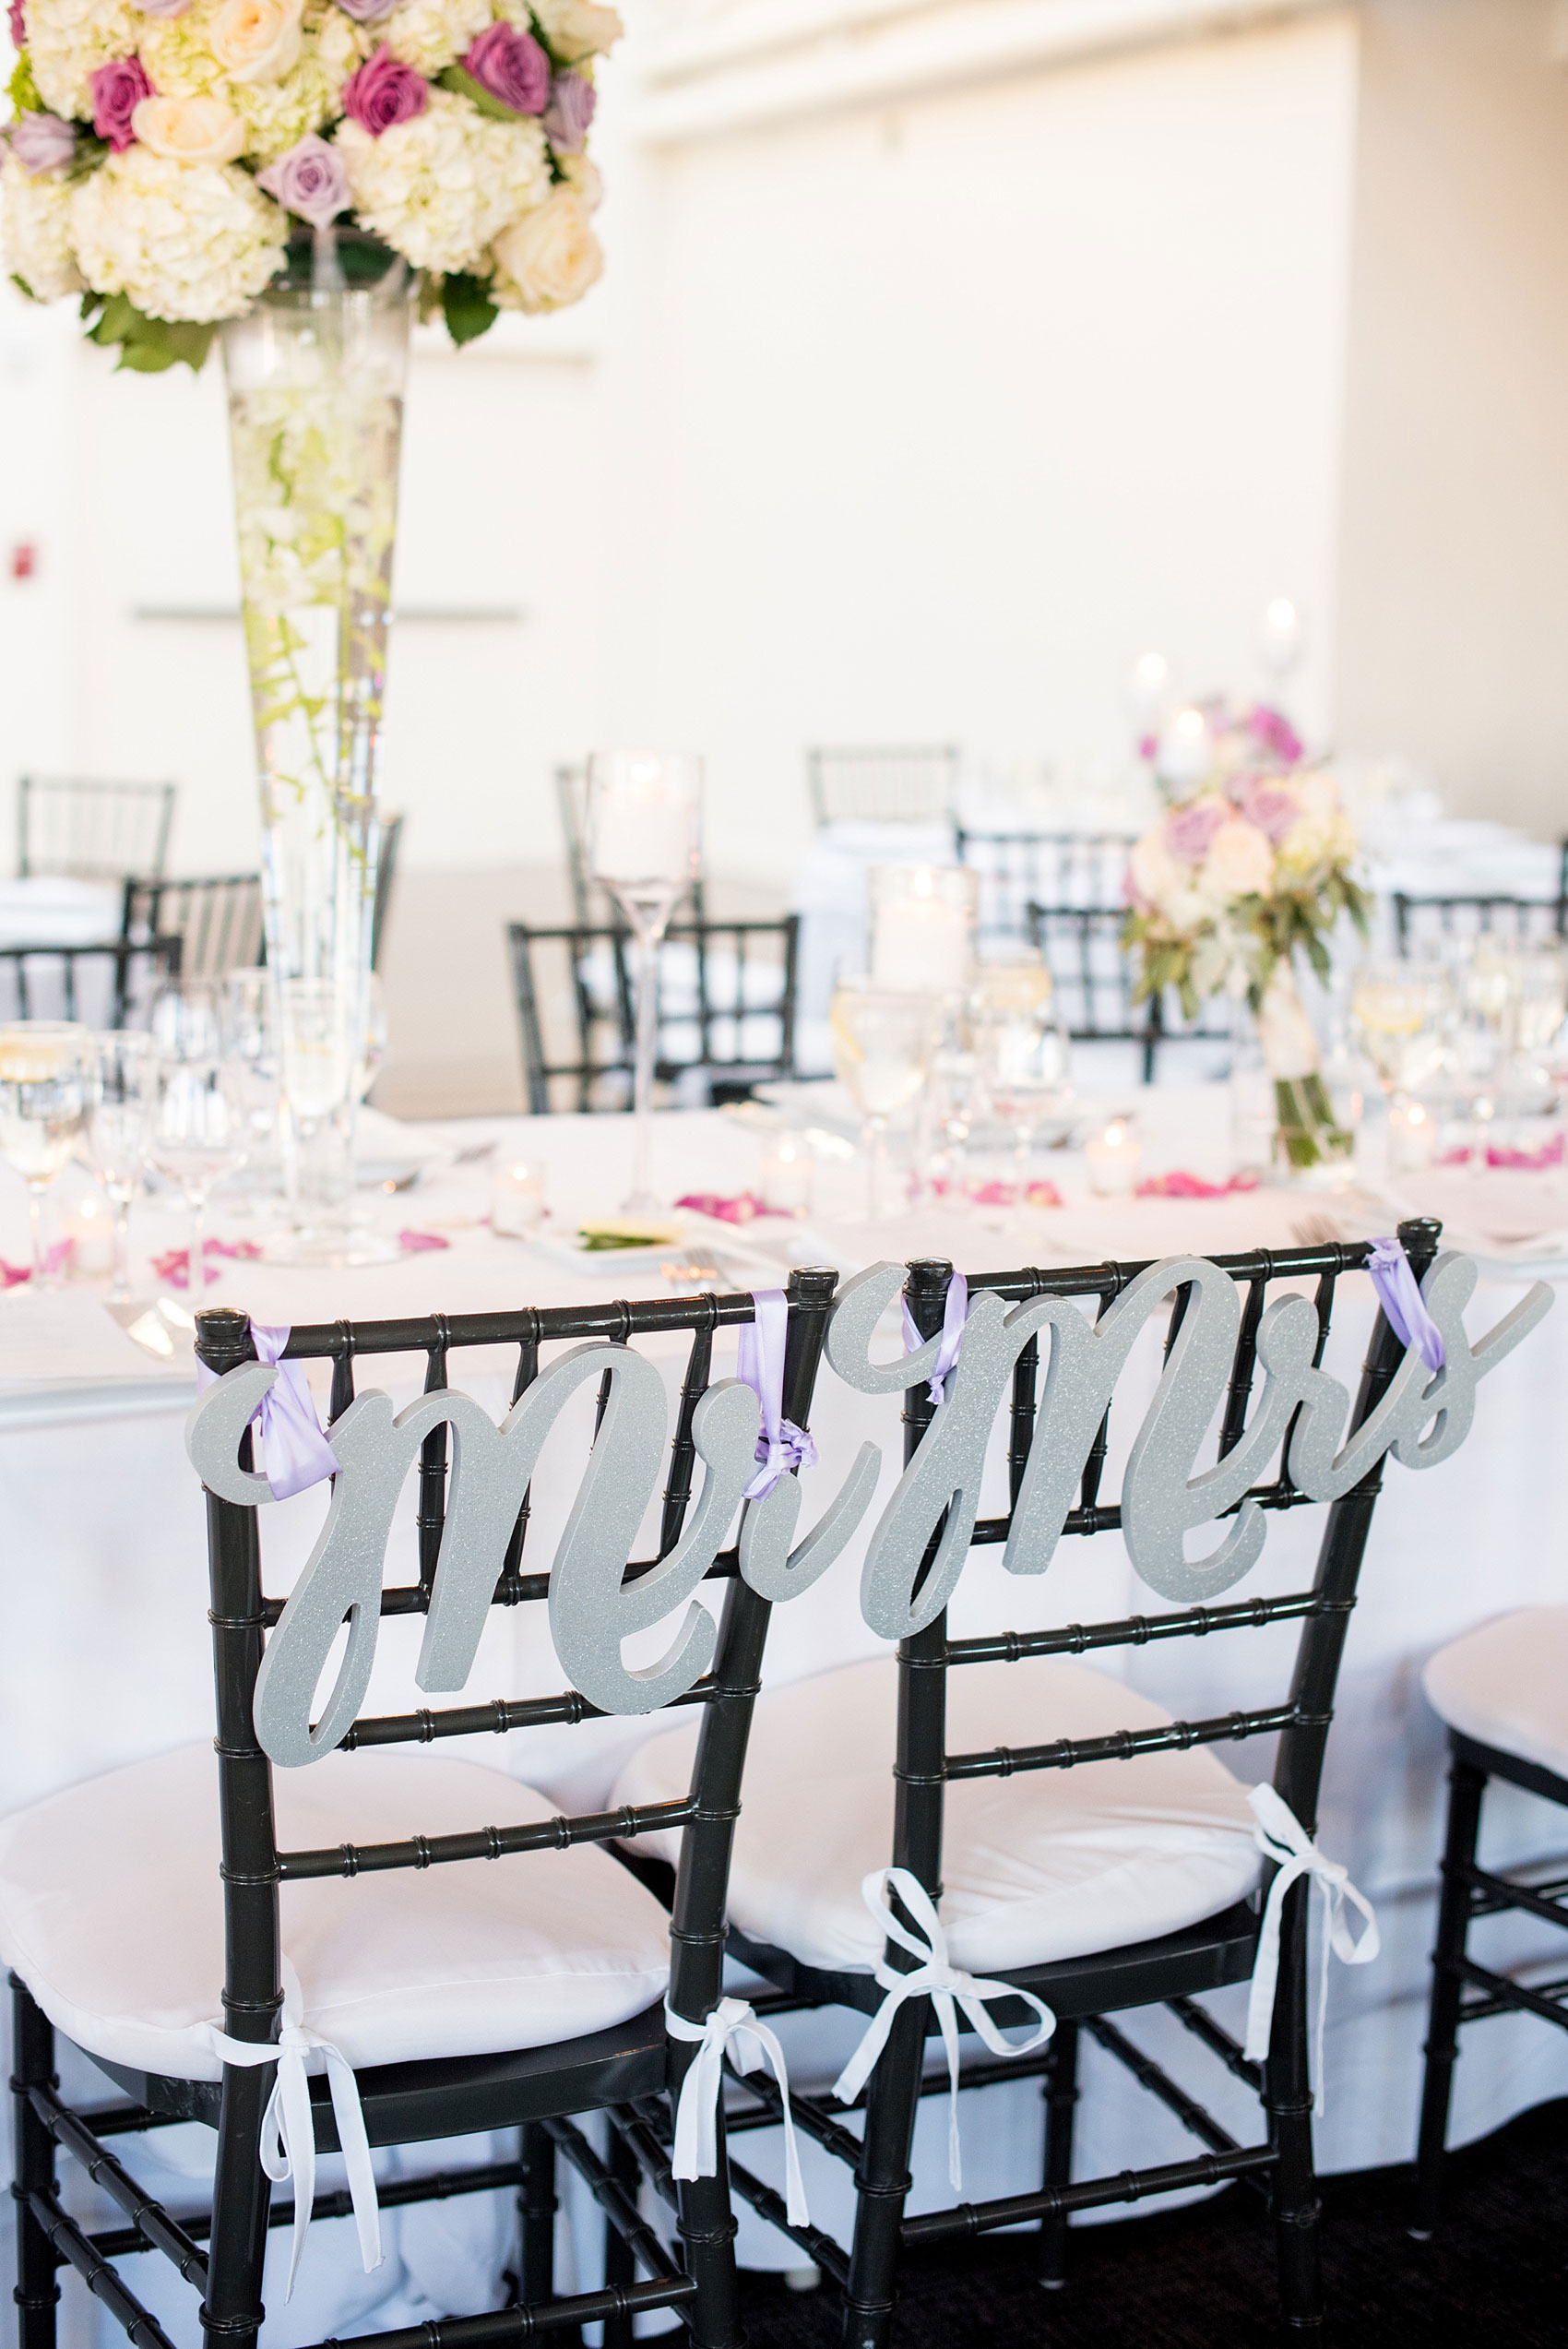 Mikkel Paige Photography photos of a NYC wedding at Tribeca Rooftop. An image of the laser cut silver Mr. and Mrs. chair signs.